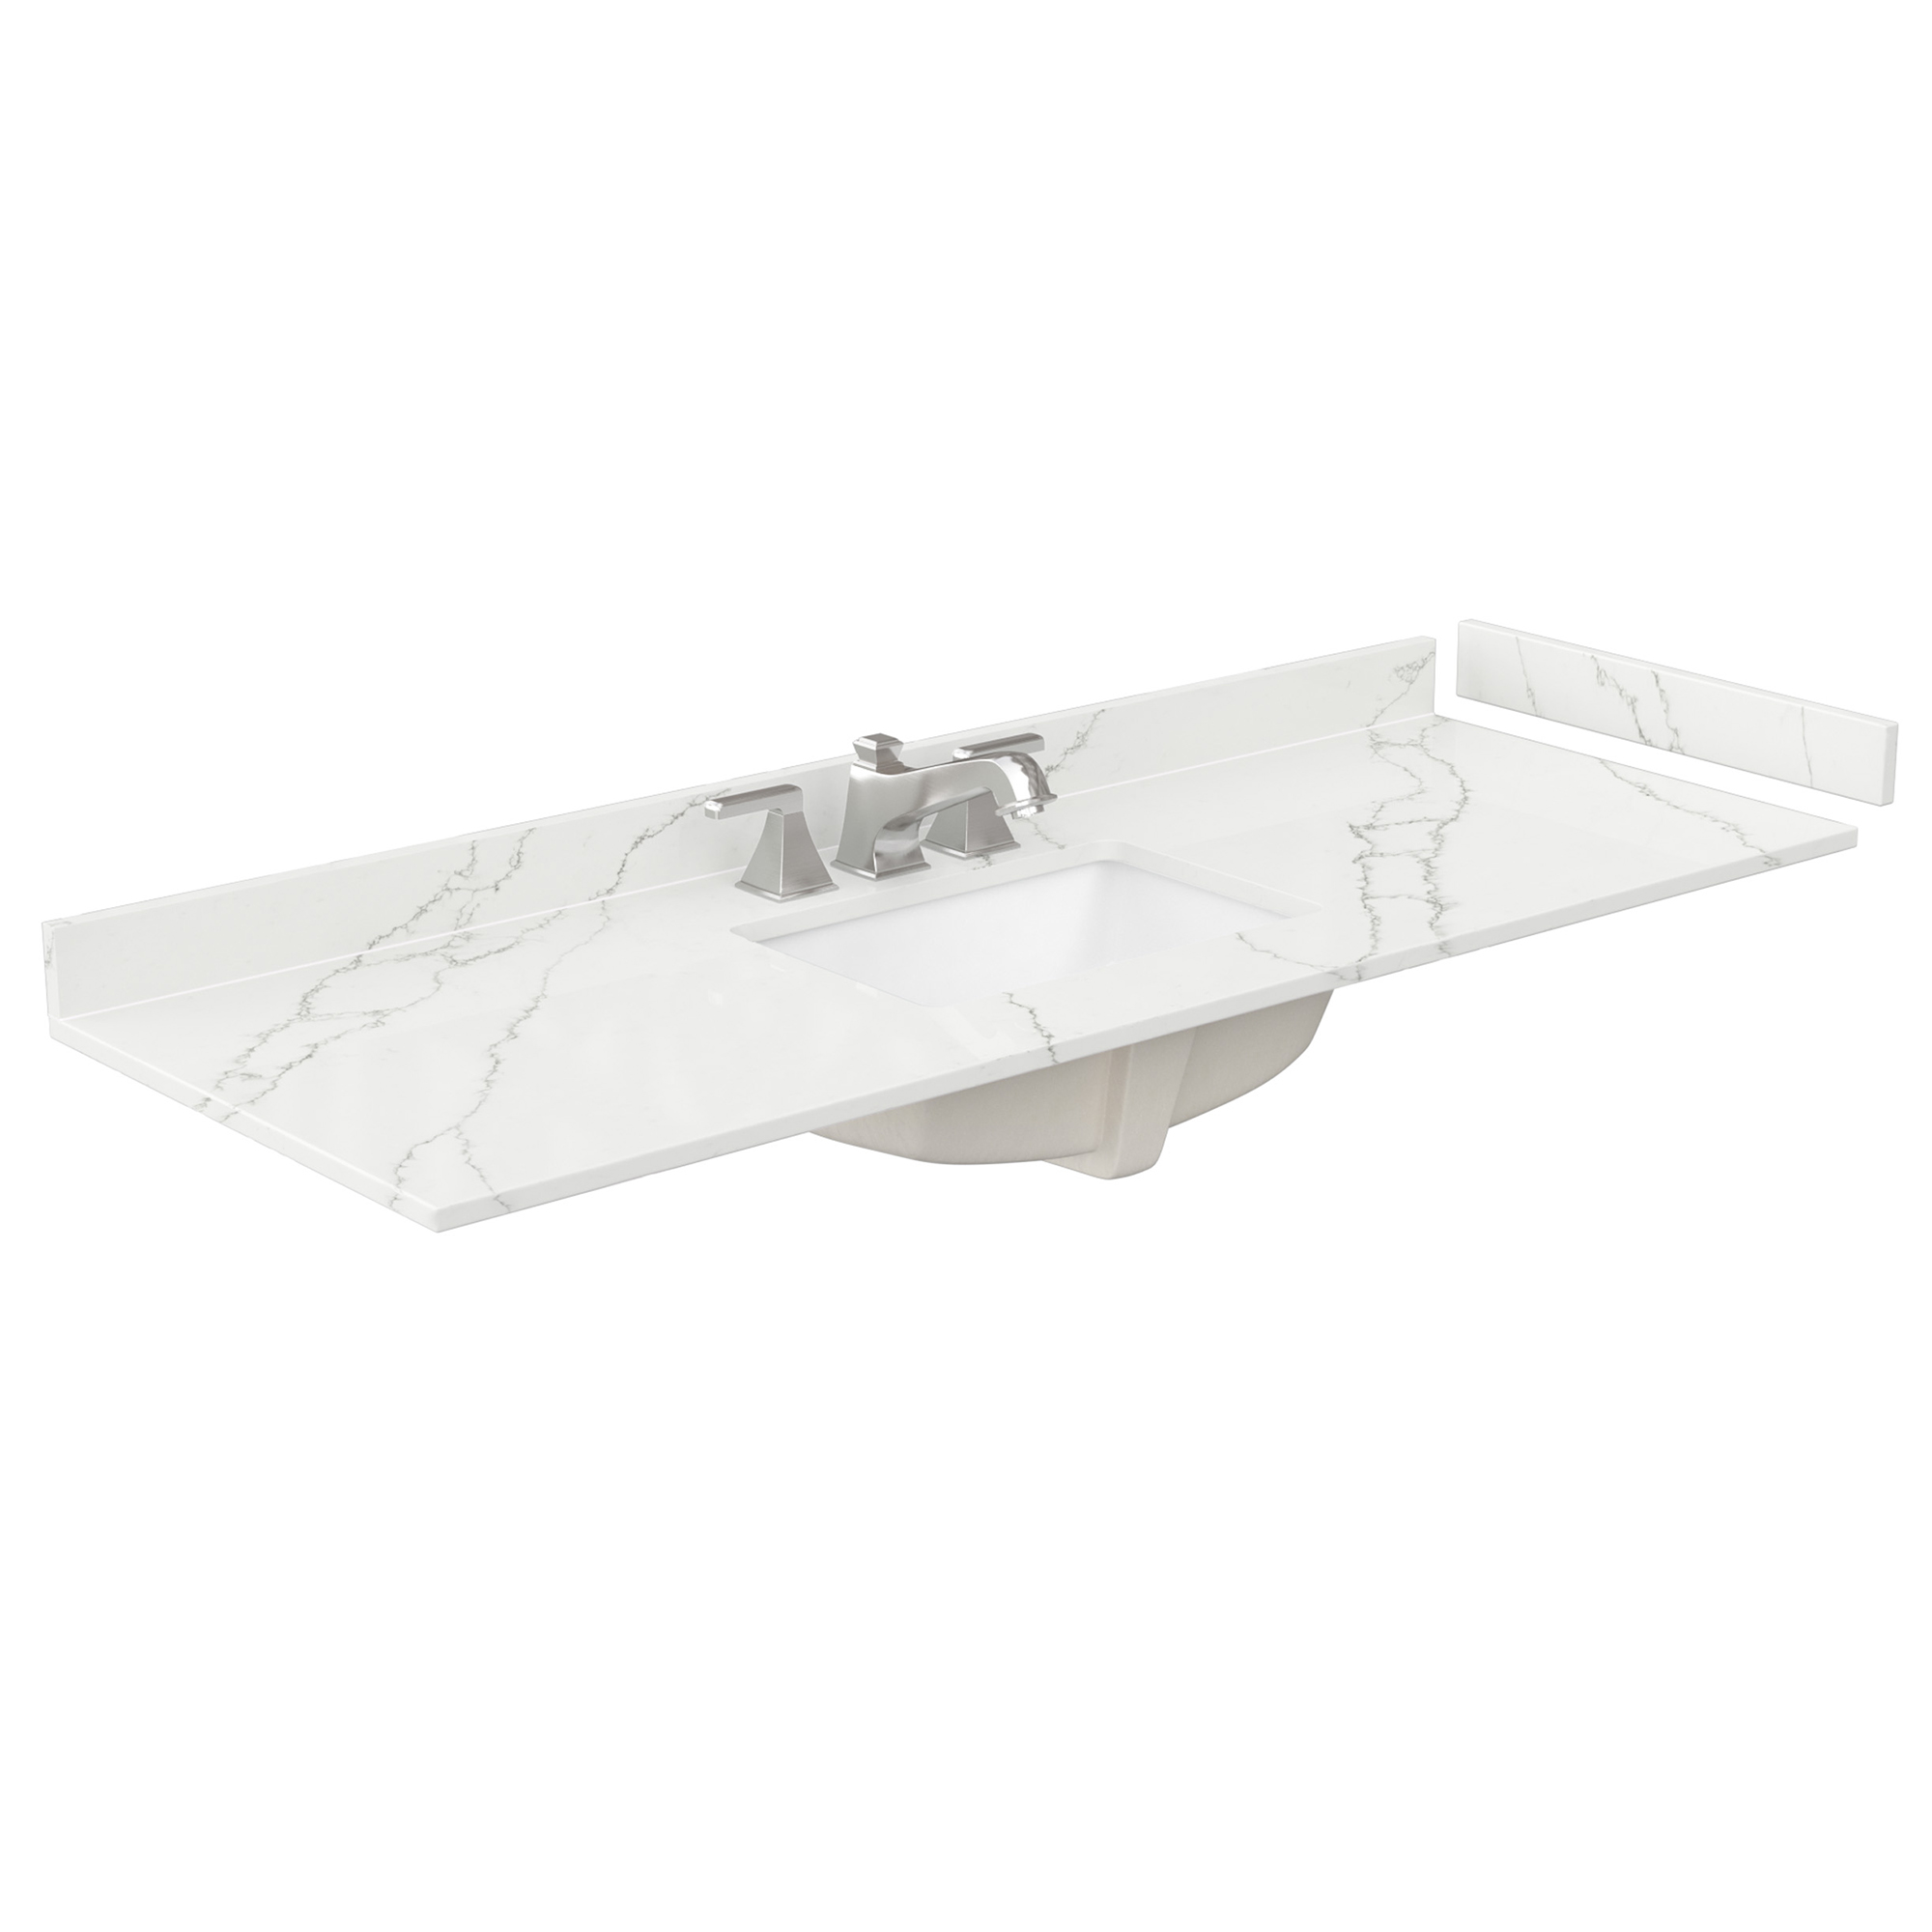 60" Single Countertop - Giotto Quartz (8066) with Undermount Square Sink (3-Hole) - Includes Backsplash and Sidesplash WCFQC360STOPUNSGT